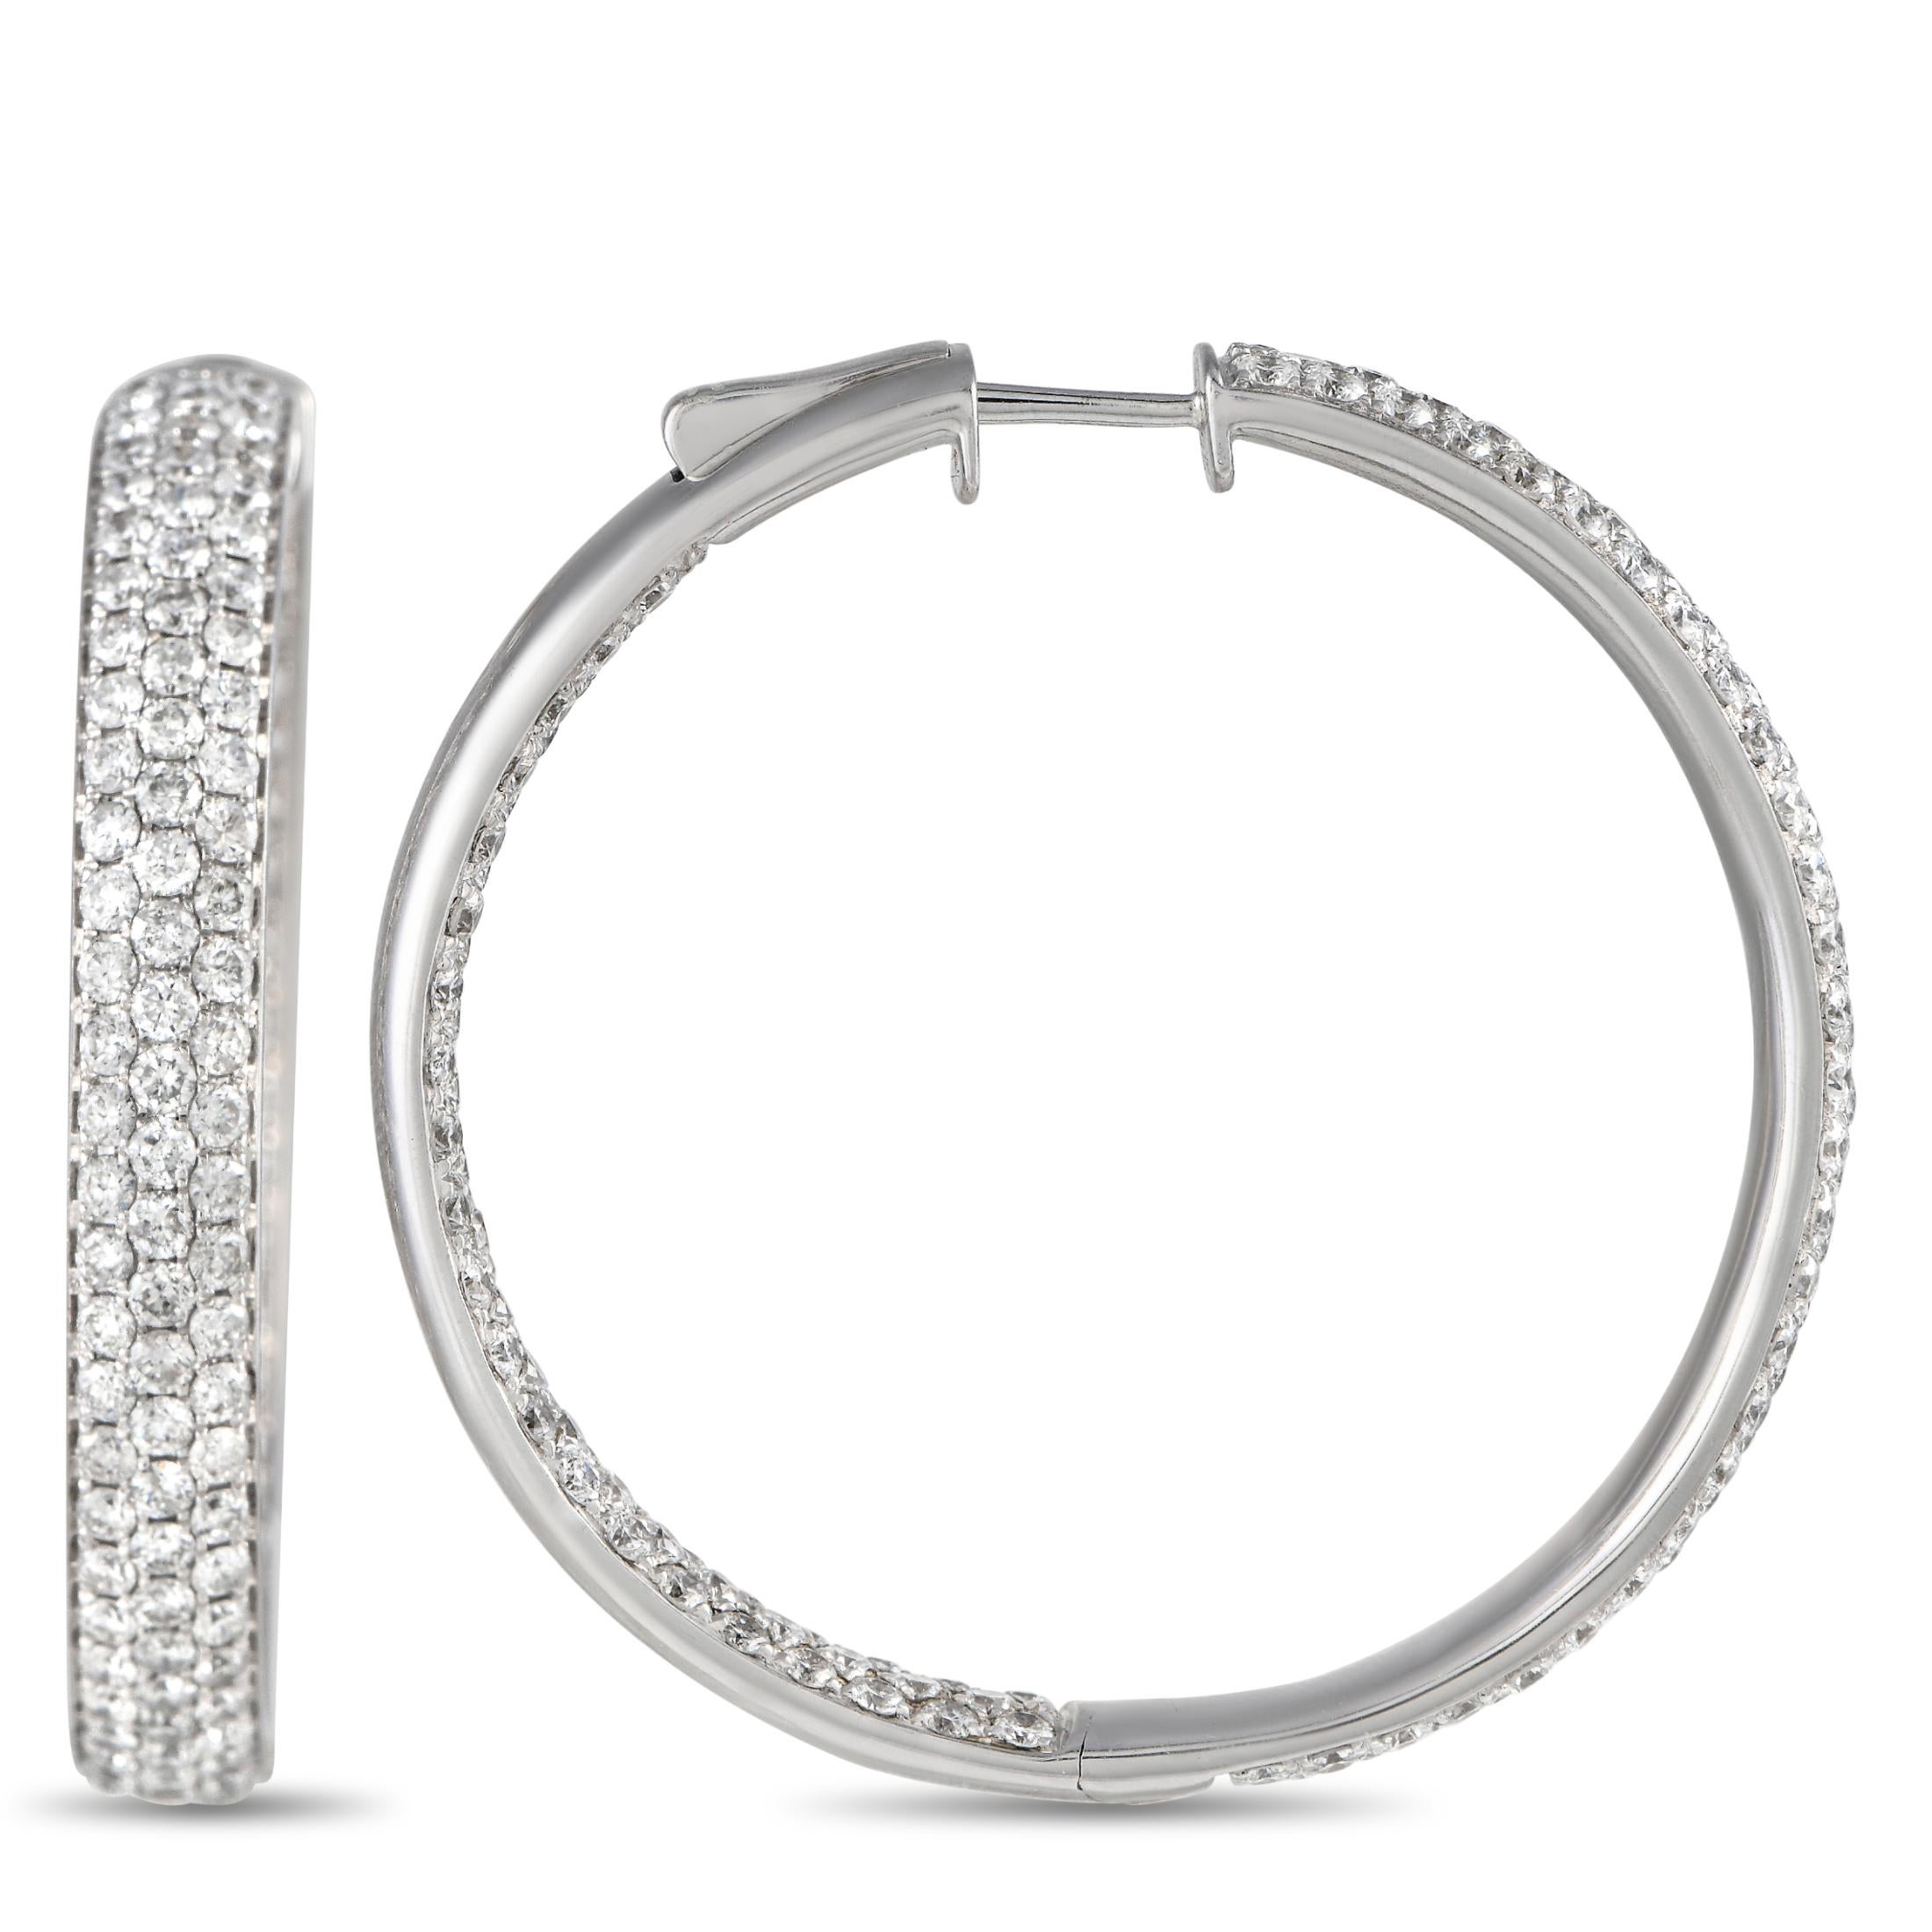 Sparkling diamonds with a total weight of 6.10 carats make seemingly every inch of these exquisite hoop earrings come alive whenever they catch the light. Set in 14K White Gold, each one measures 1.5” round. 
 
This jewelry piece is offered in brand